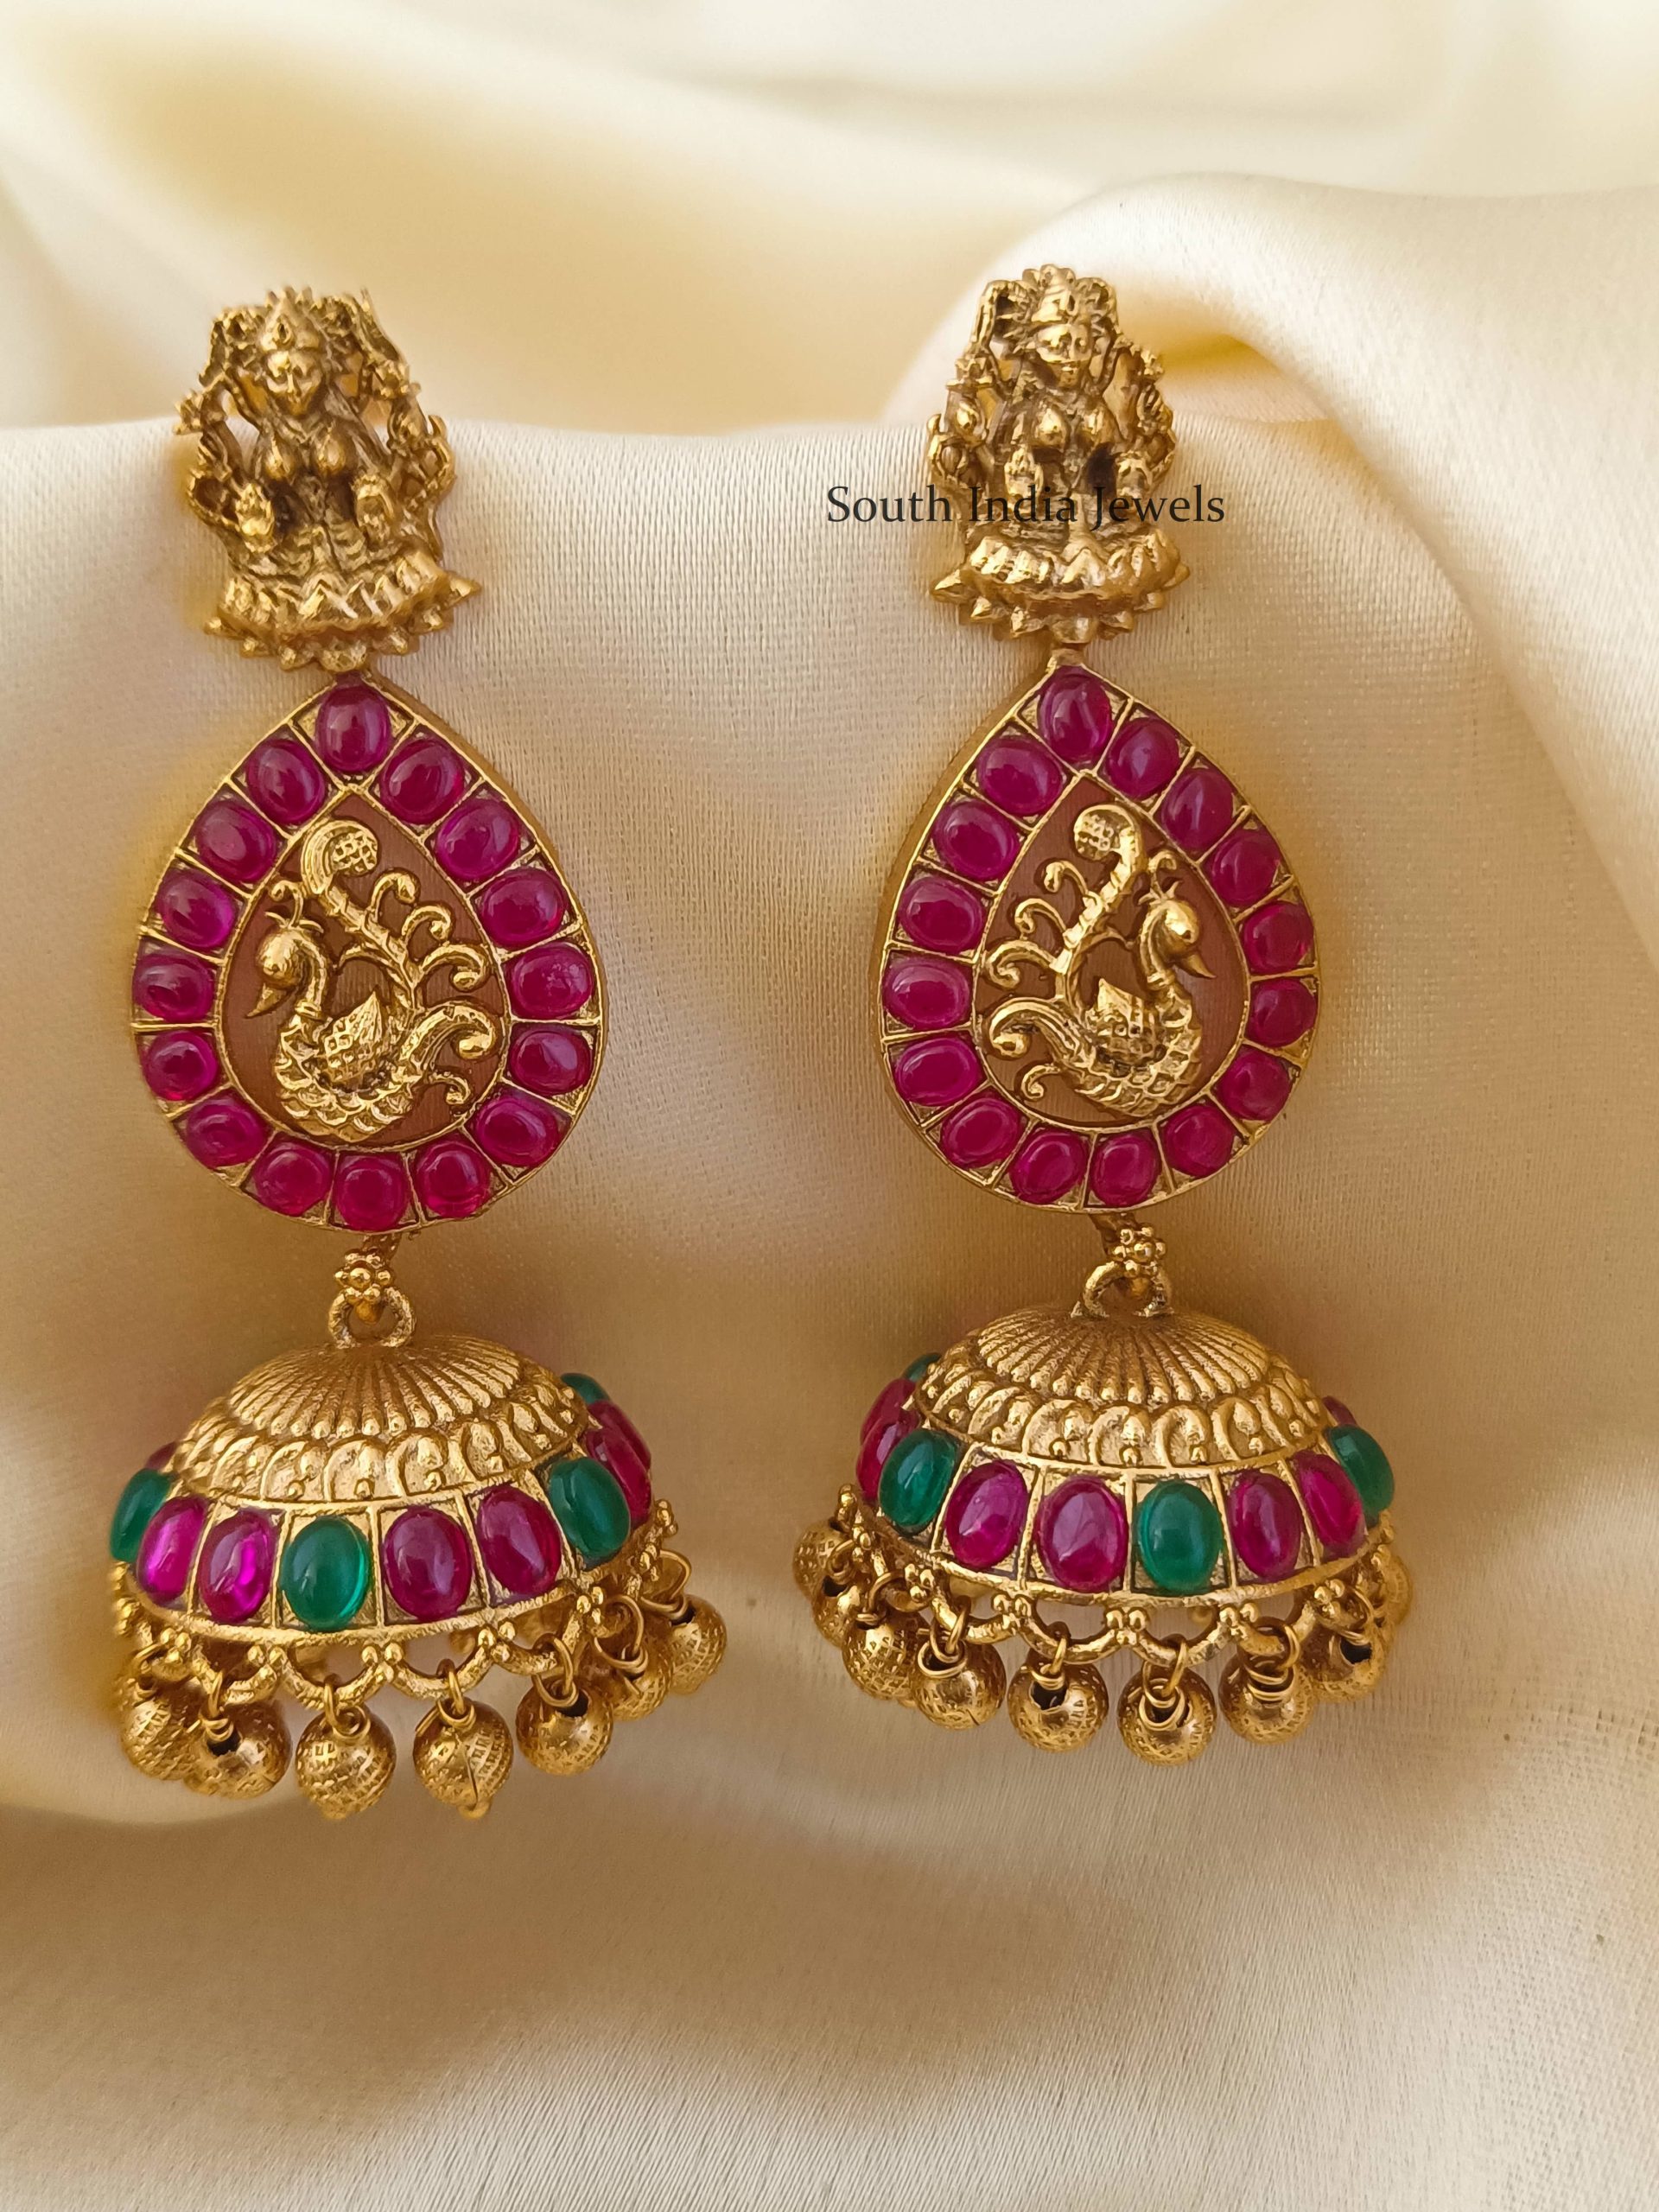 Artificial Jhumkas Earrings -South India Jewels Online Stores